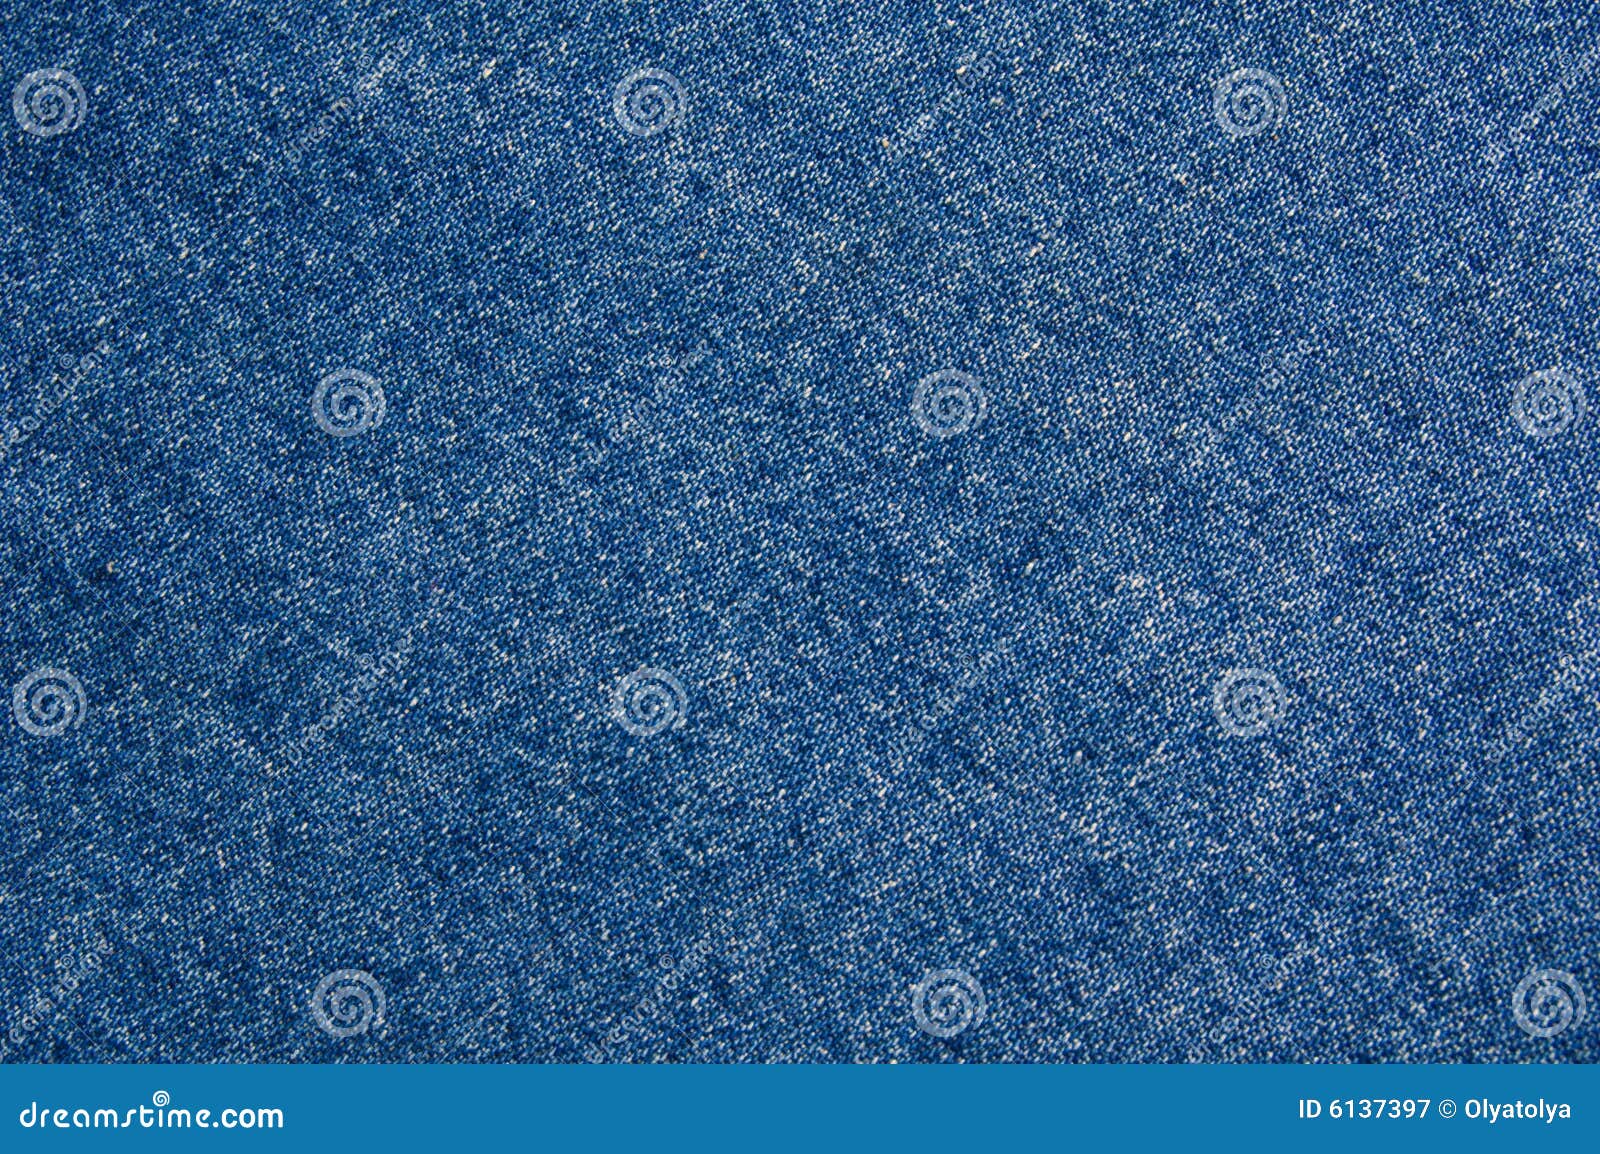 Jeans cloth texture stock image. Image of wear, fabric - 6137397